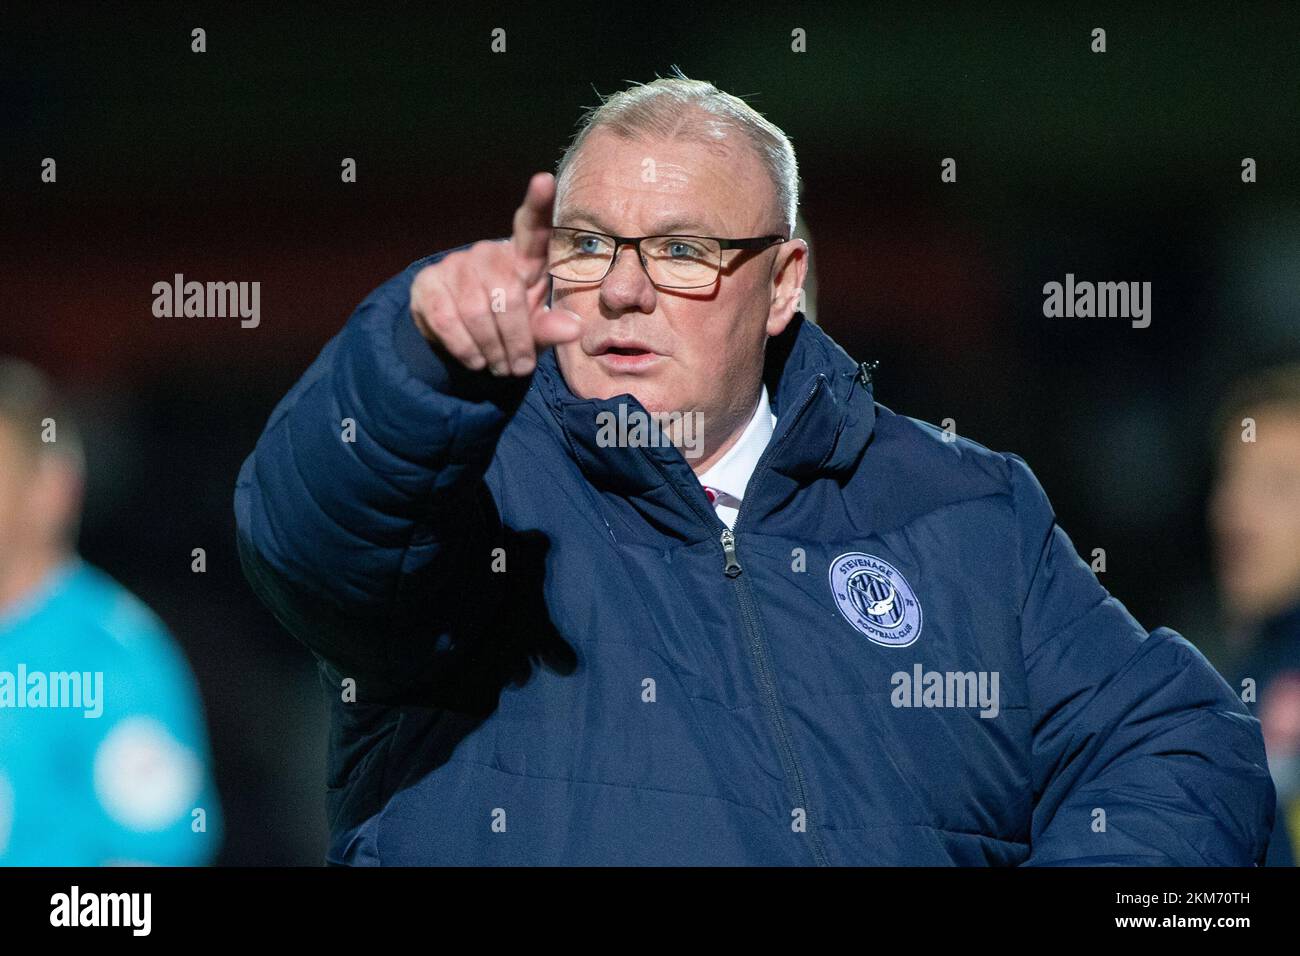 Steve Evans, football manager, Stevenage FC on touchline during game at Lamex Stadium, Stevenage.Gesticulating, shouting and giving direction . Stock Photo